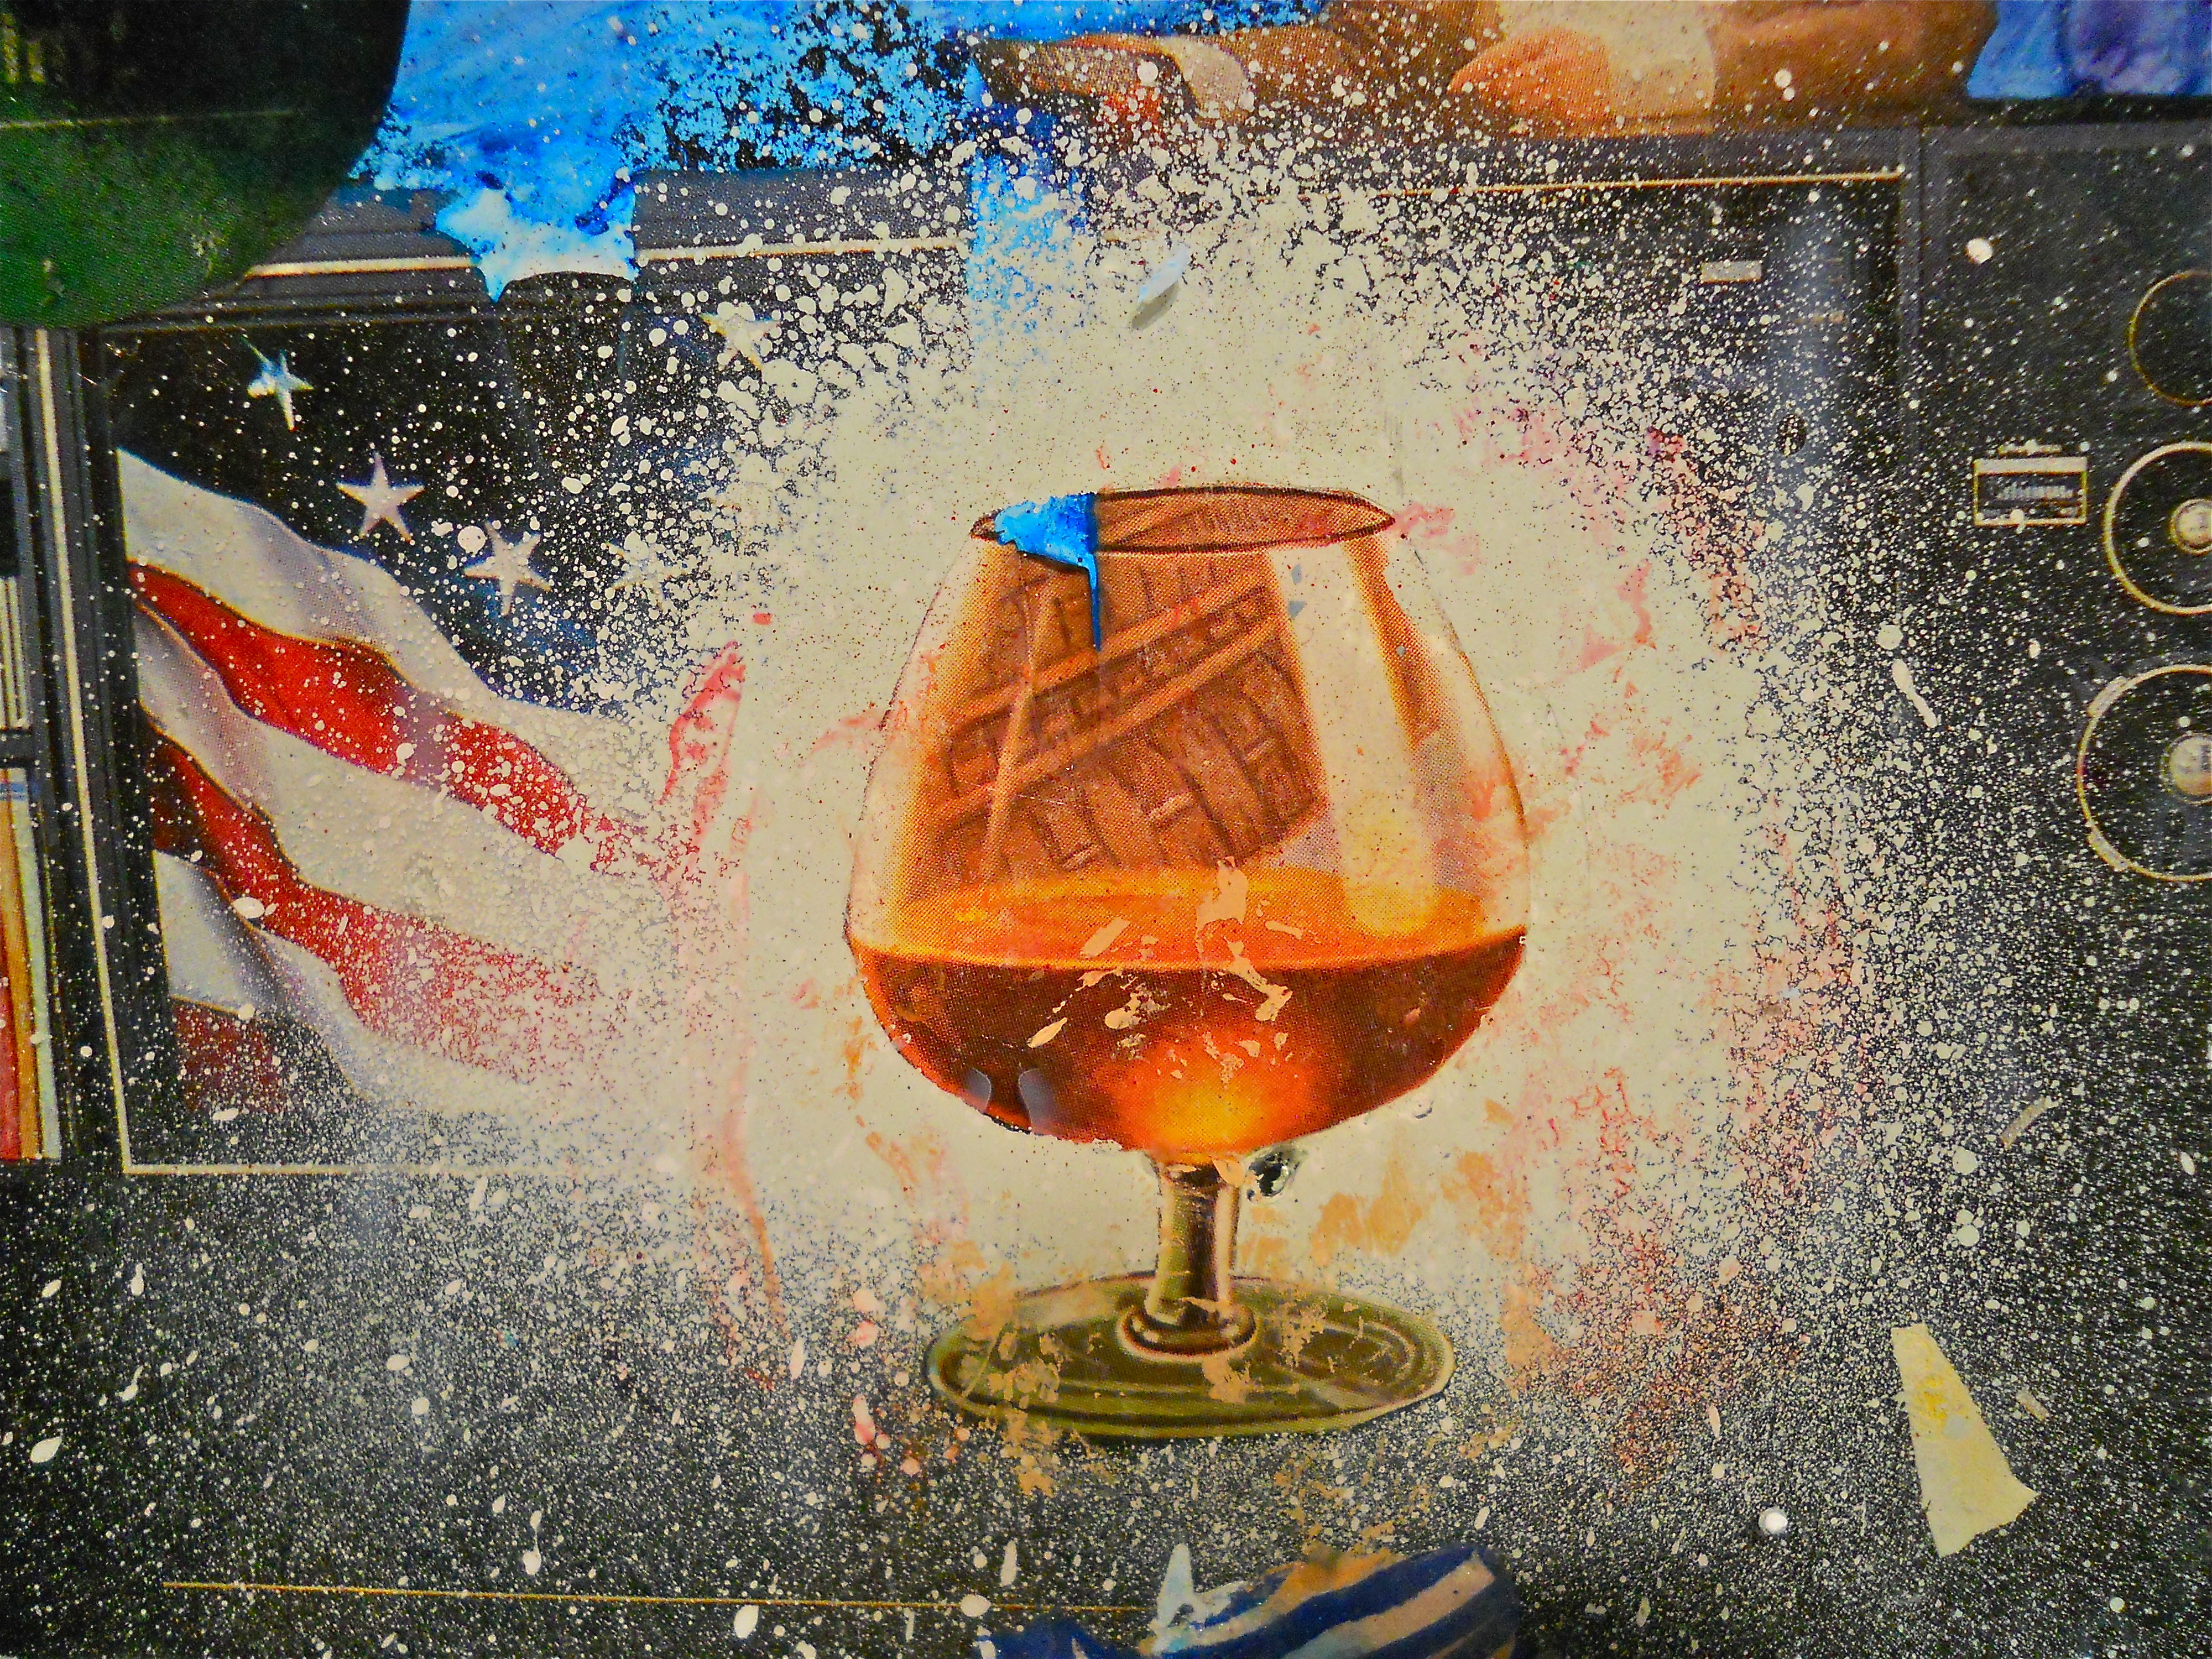 "Drink the Past" (detail) 2013 Collage-painting on Plexiglas, for sale; $100